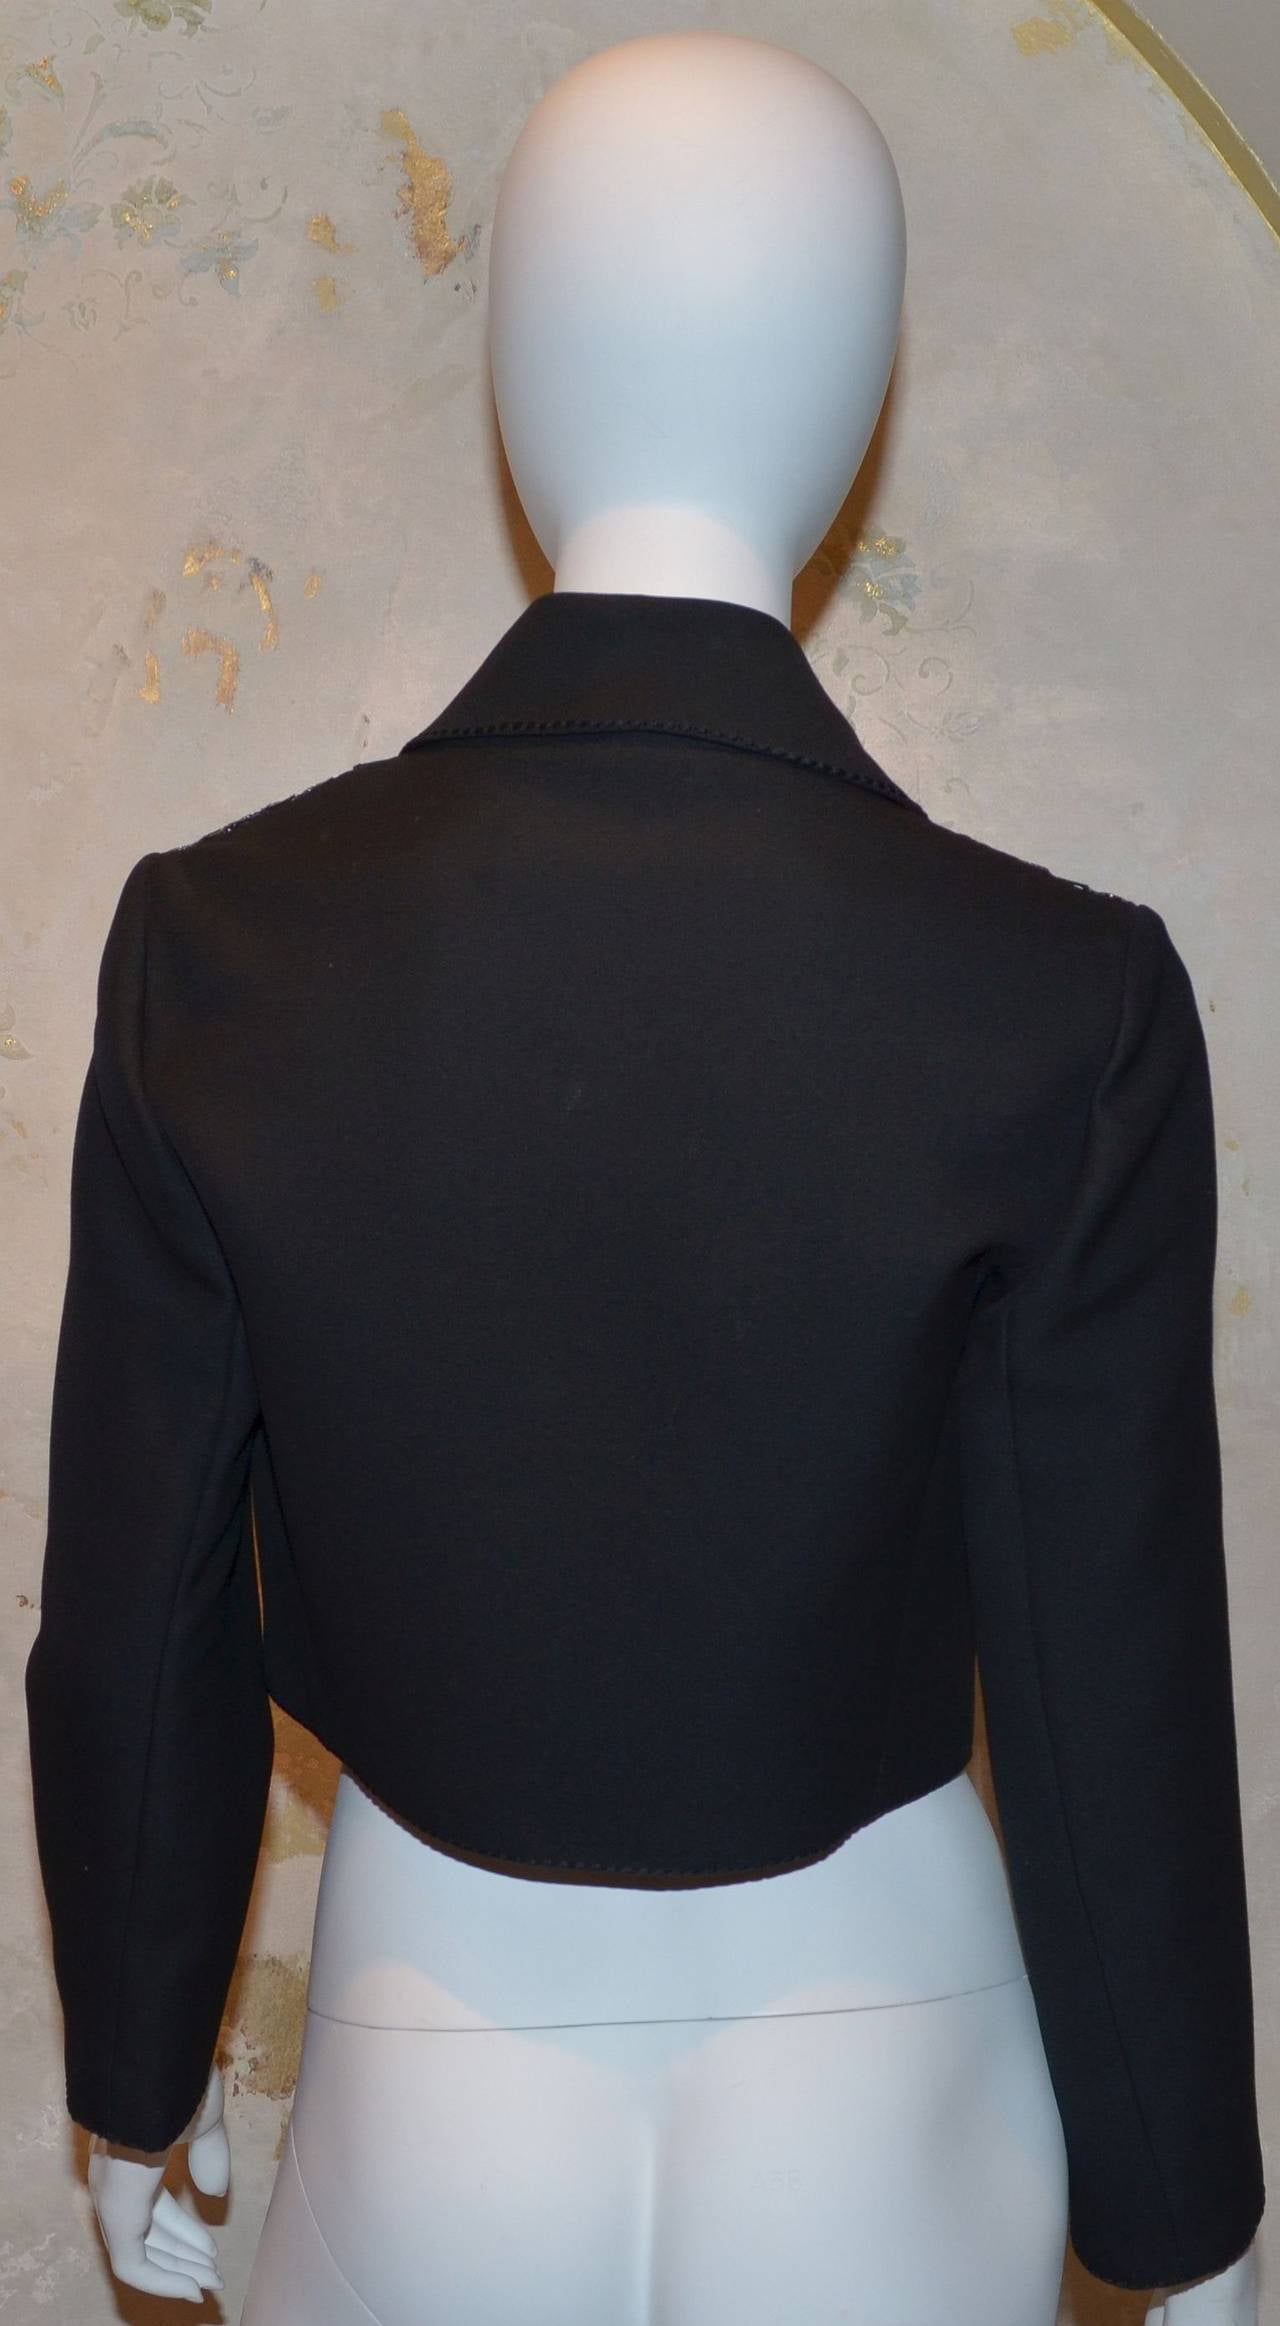 Vintage Structured Wool Boutique Vintage Pierre Balmain Caroline Campbell Jacket features a unique black circular patent material at the front, fully lined jacket in excellent vintage condition.

Measurements: 
Bust - 38'' 
Sleeves - 22''